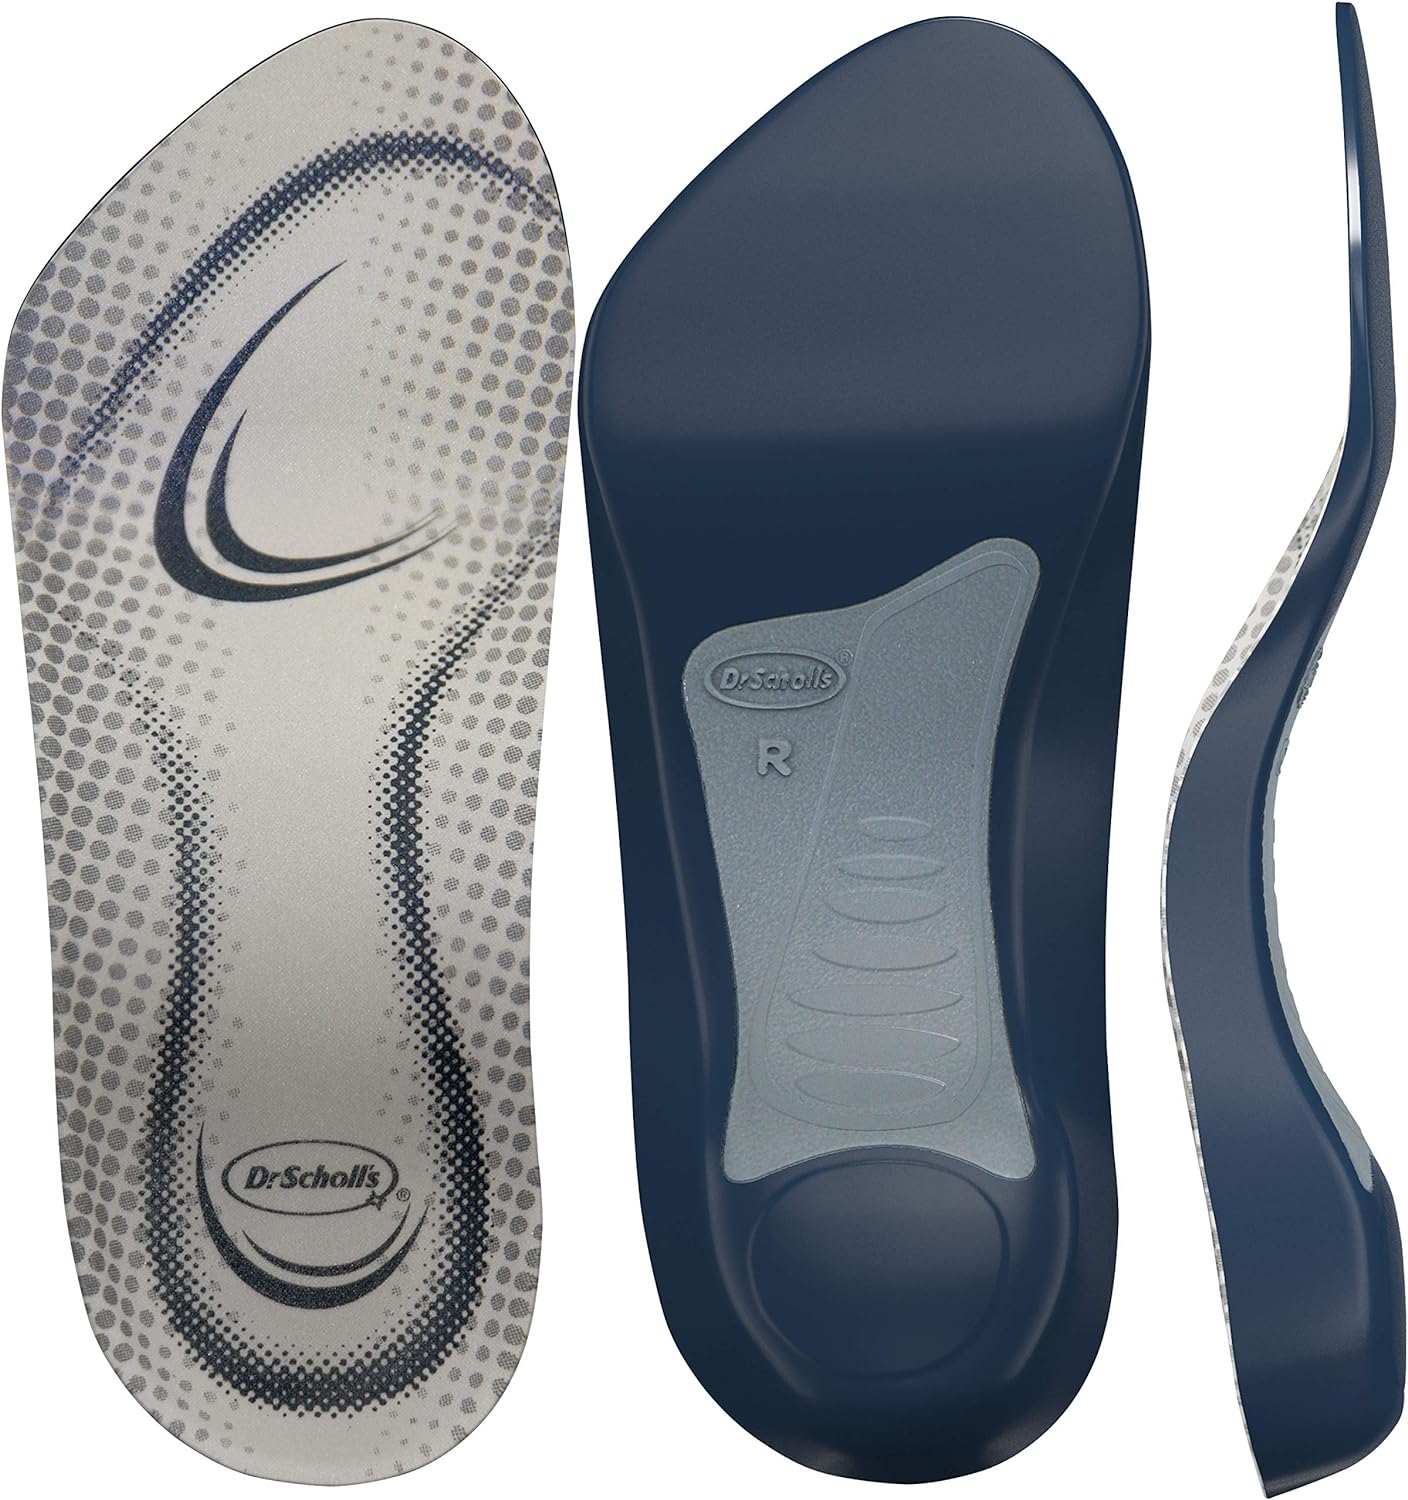 Dr. Scholls Tri-Comfort Insoles // Comfort for Heel, Arch and Ball of Foot with Targeted Cushioning and Arch Support (for Mens 8-14, Also Available Womens 6-10)